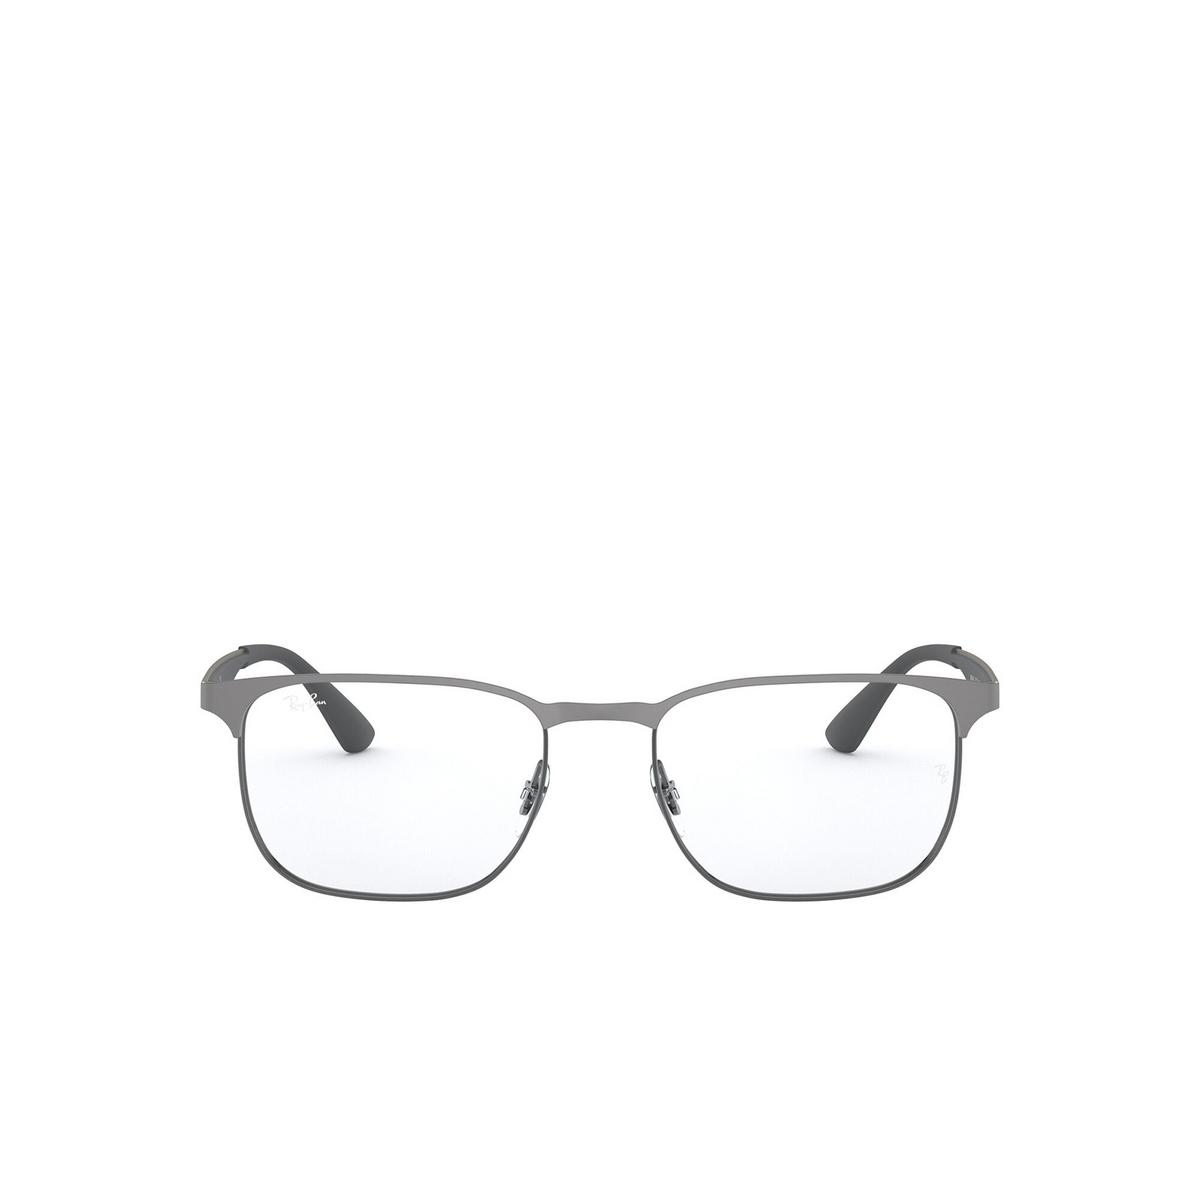 Ray-Ban® Square Eyeglasses: RX6363 color Brushed Gunmetal On Gunmetal 2553 - front view.